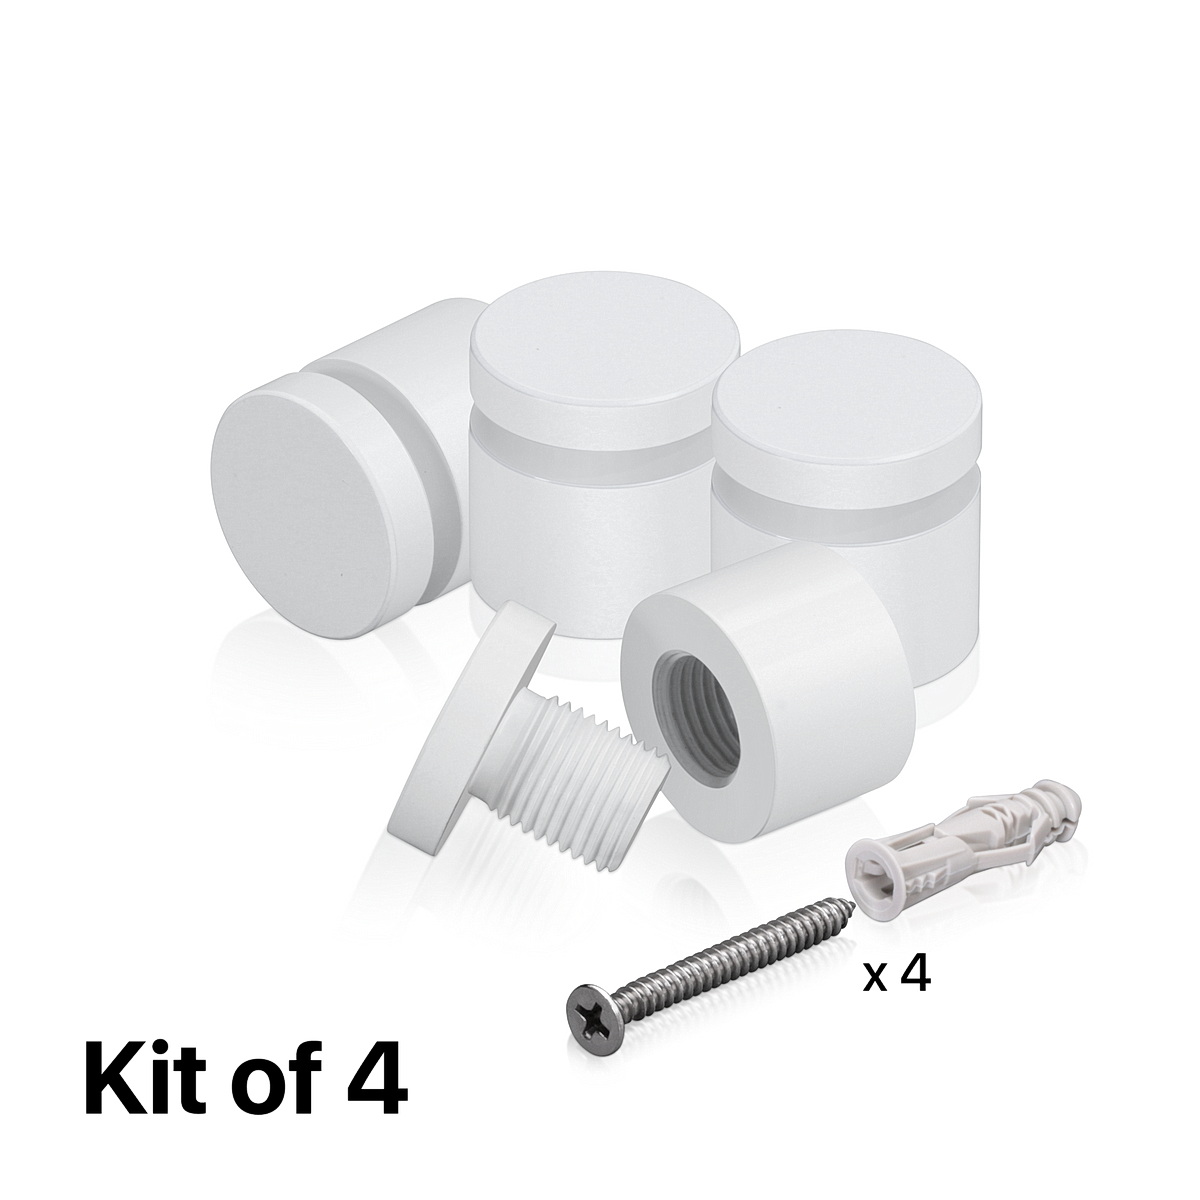 (Set of 4) 3/4'' Diameter X 1/2'' Barrel Length, Affordable Aluminum Standoffs, White Coated Finish Standoff and (4) 2216Z Screws and (4) LANC1 Anchors for concrete/drywall (For Inside/Outside) [Required Material Hole Size: 7/16'']